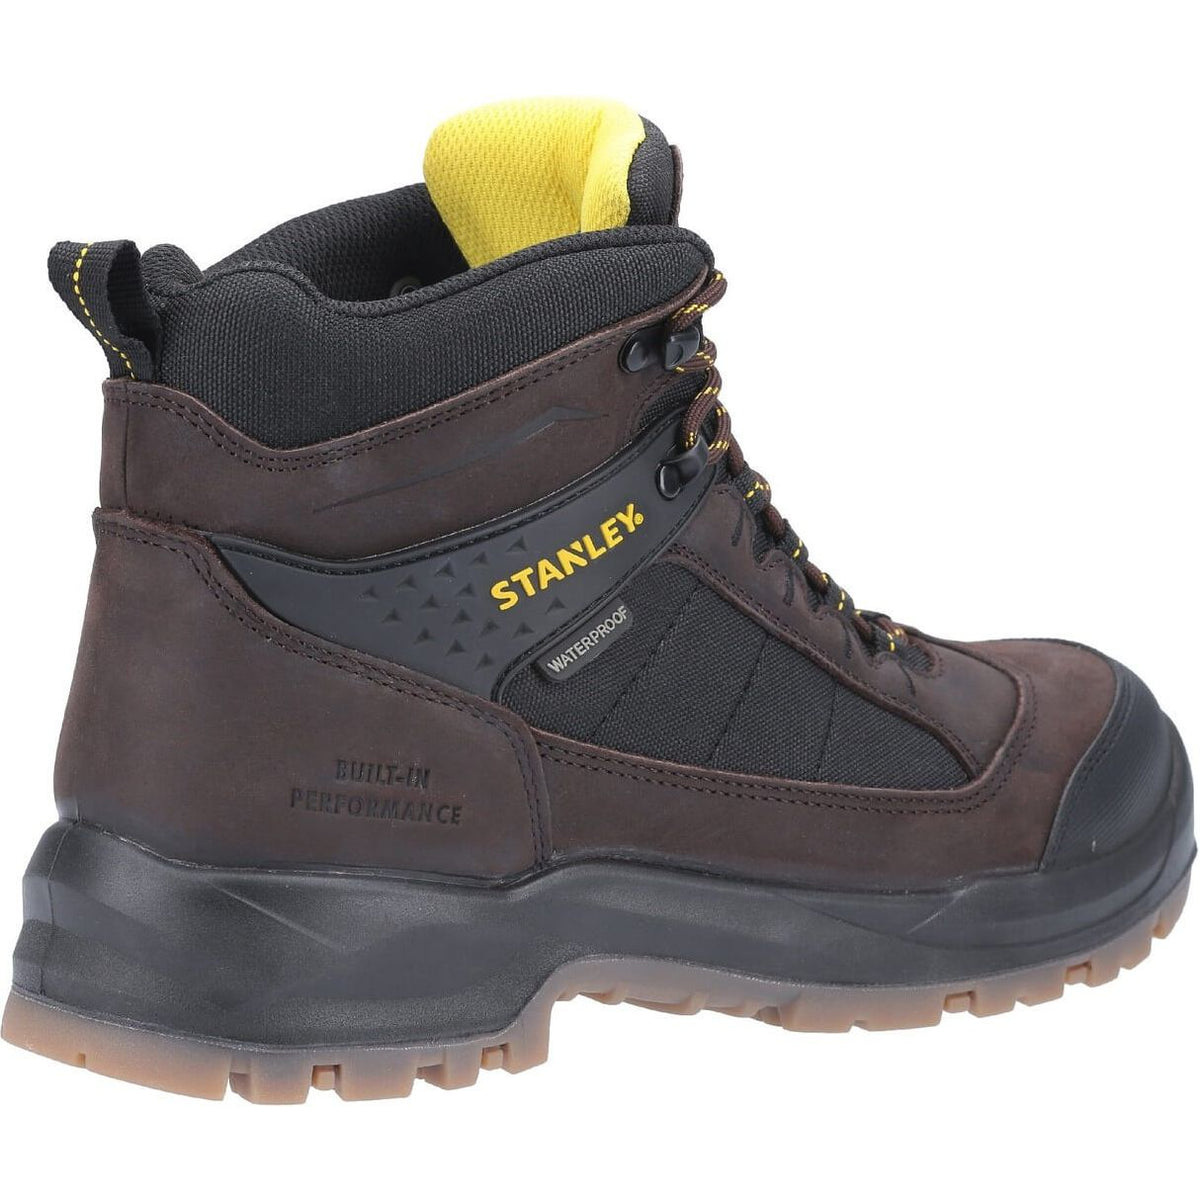 MENS STANLEY WATERPROOF LEATHER STEEL TOE CAP SAFETY WORK RIGGER SHOES BOOTS S3 